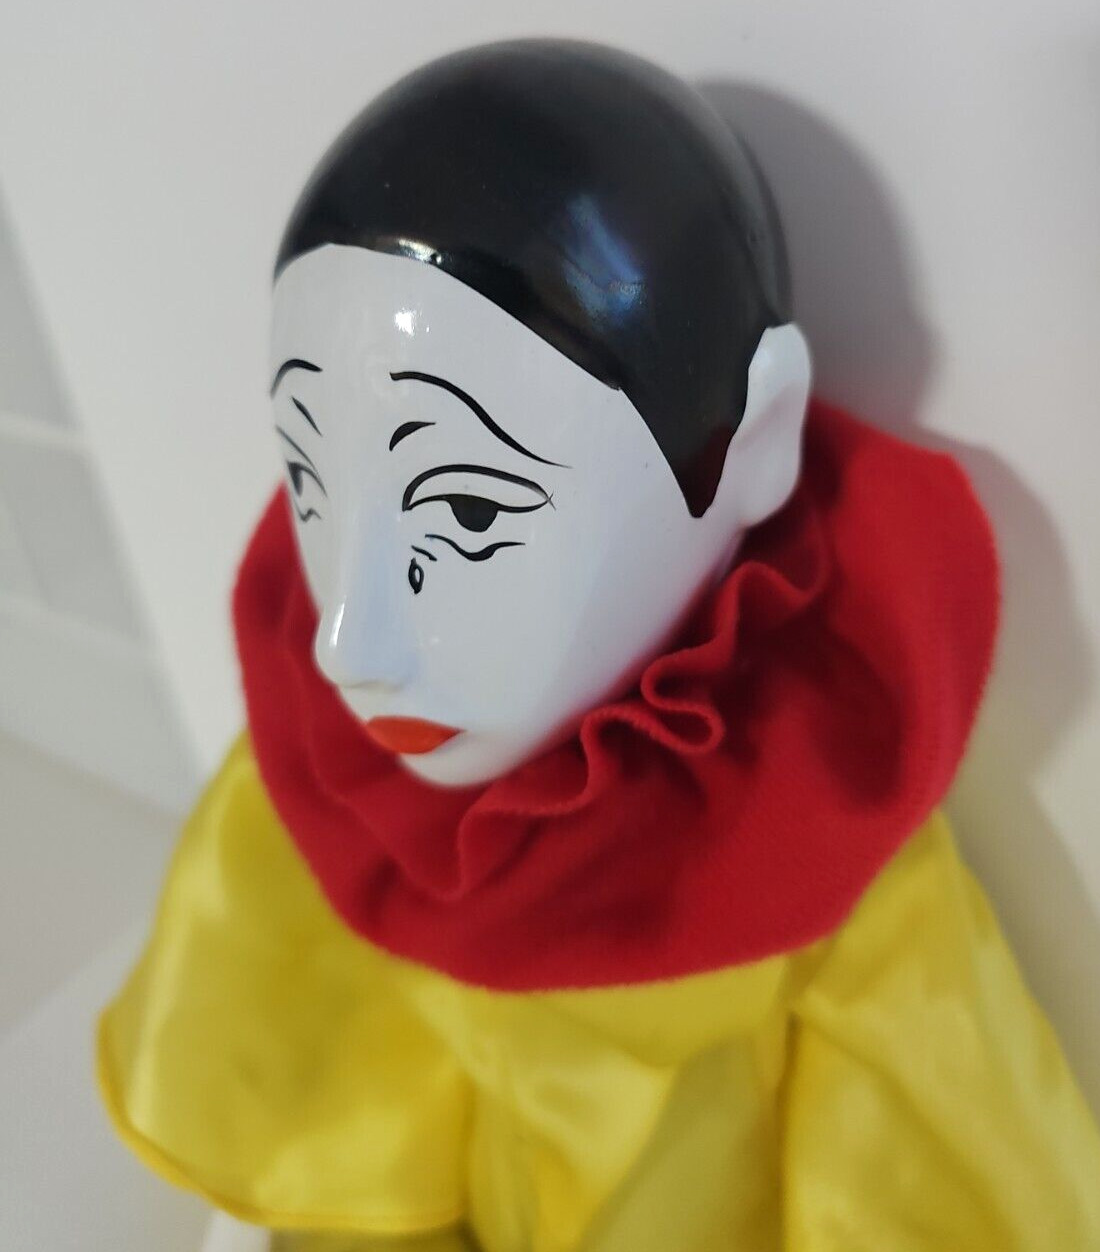 Vintage Clown Doll with Porcelain Head 20” Sad Faced Crying Clown